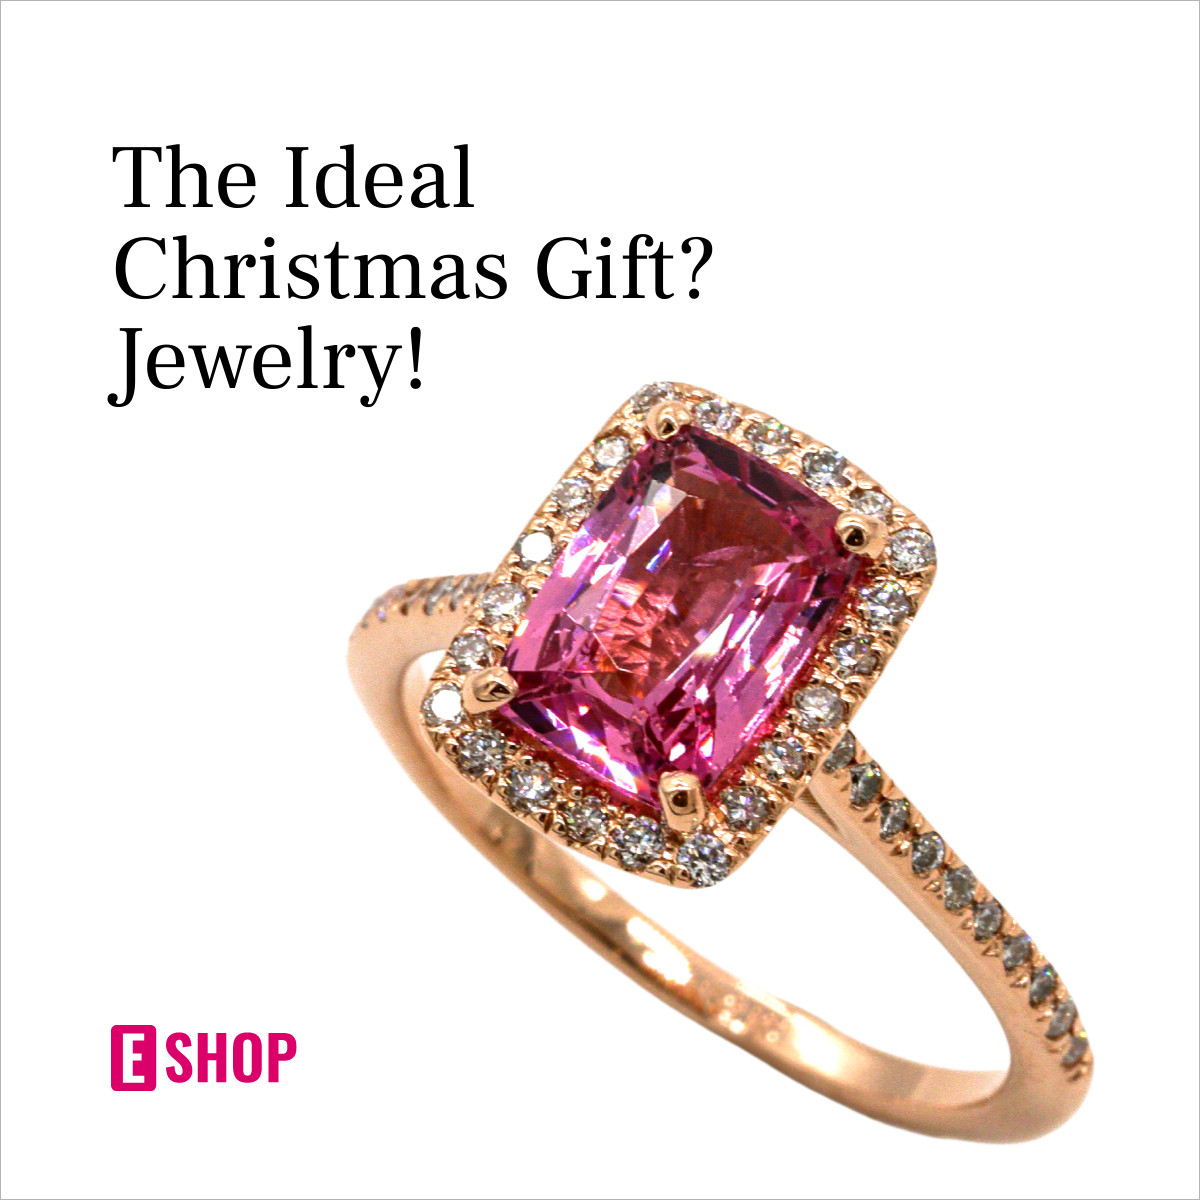 Jewelry Ideal Christmas Gift